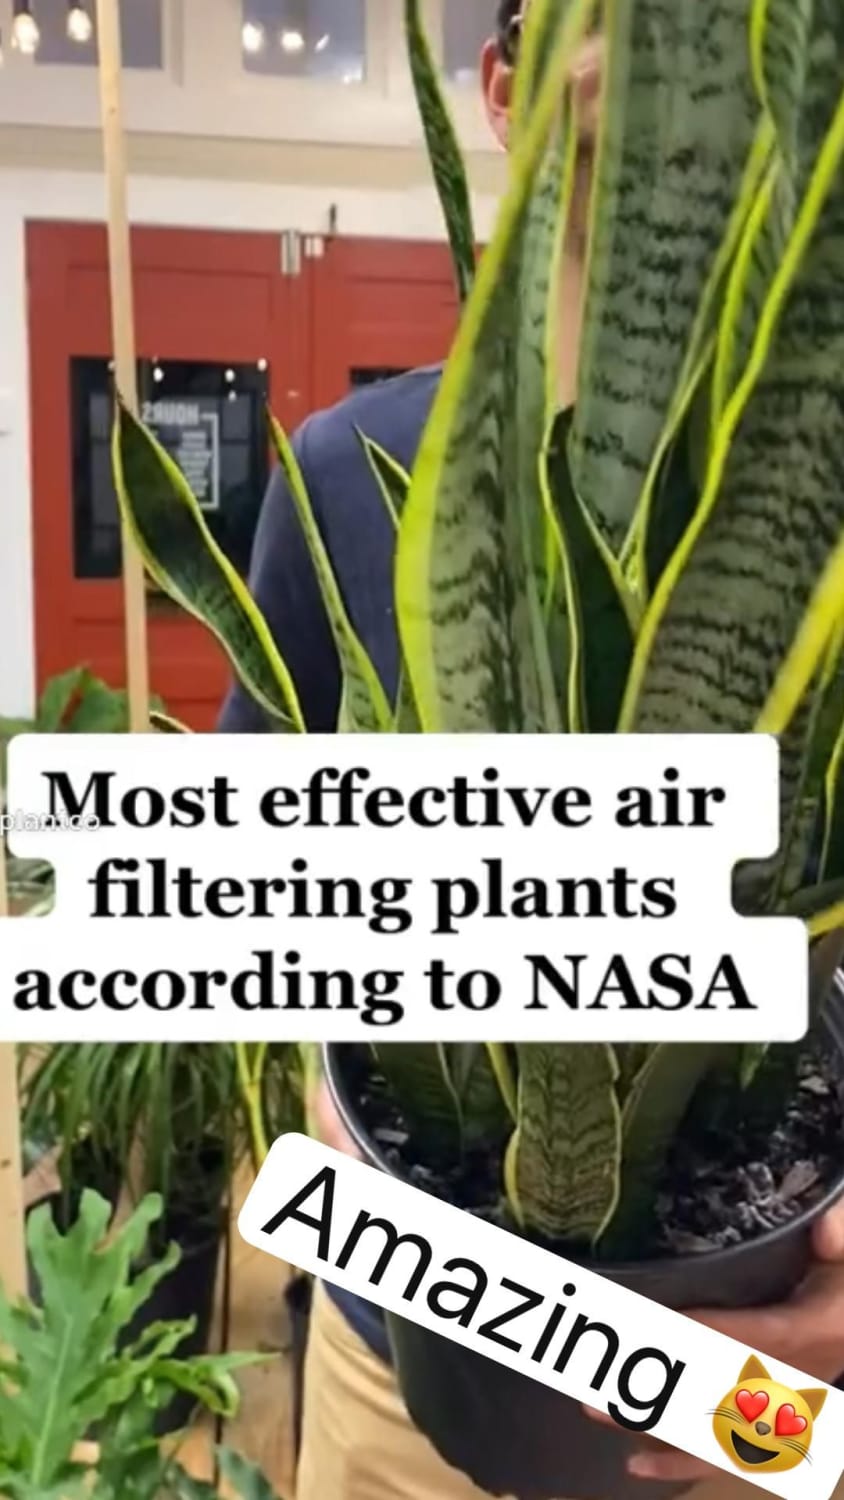 Most effective air filtering plants according to NASA 🤗